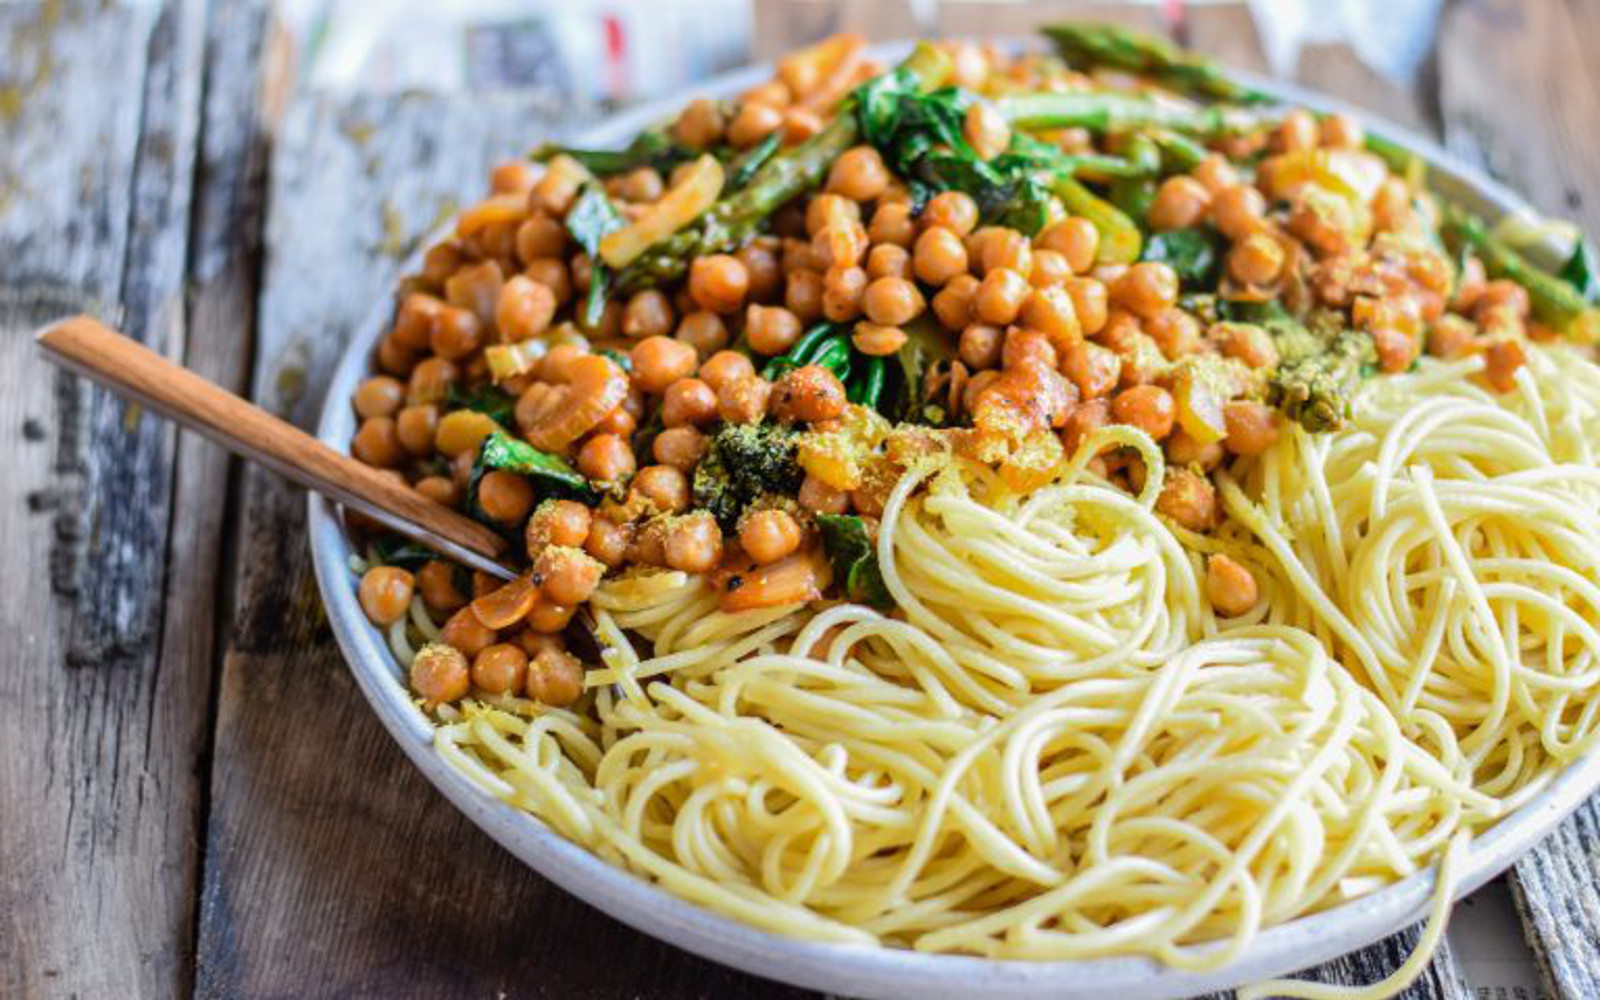 Spicy Vegetables and Chickpea Pasta